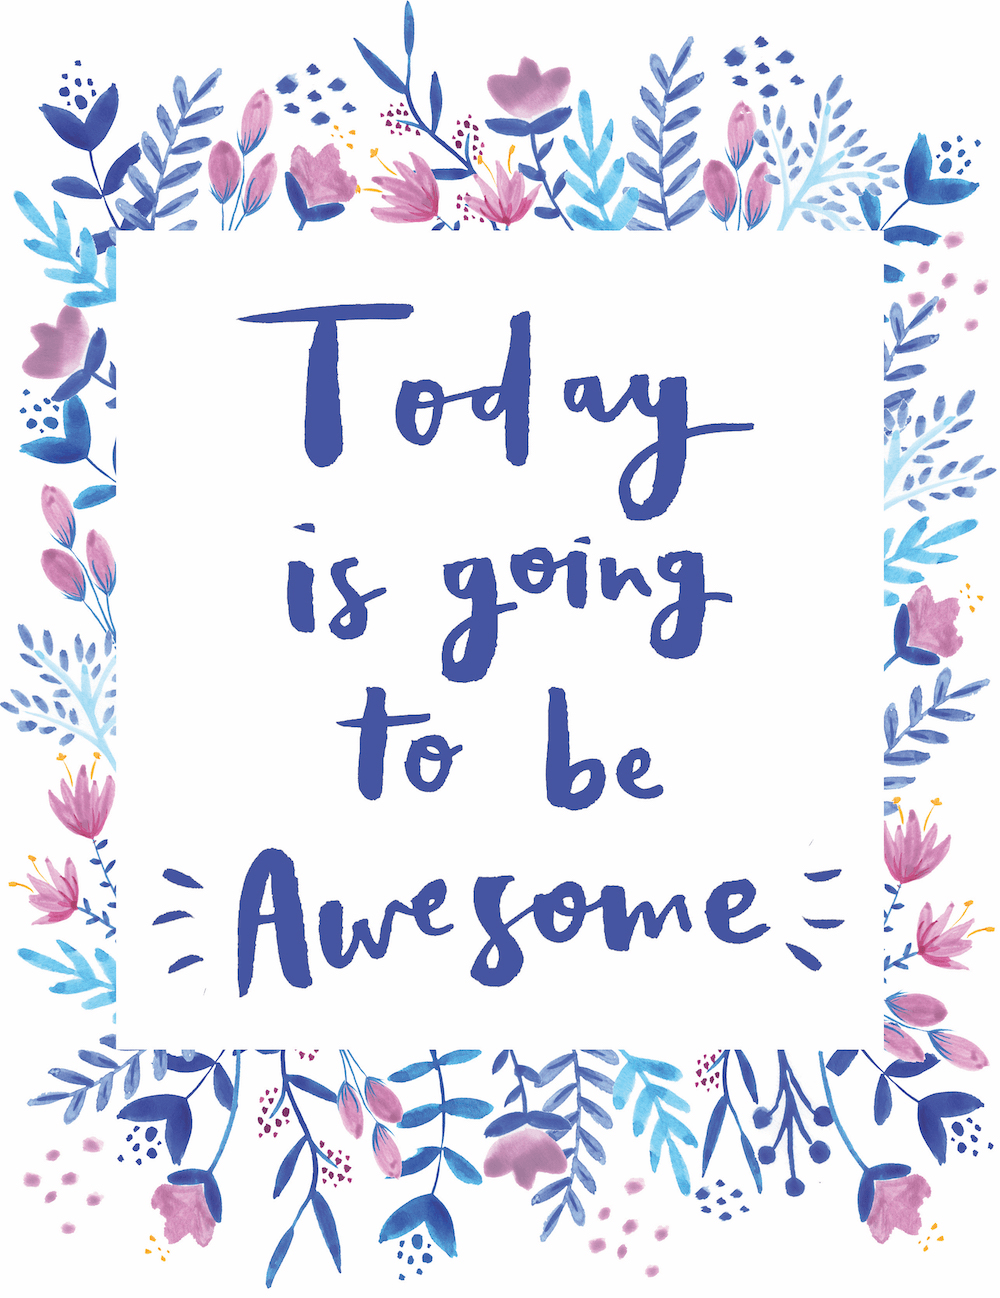 An affirmation poster claiming that "Today is going to be awesome"